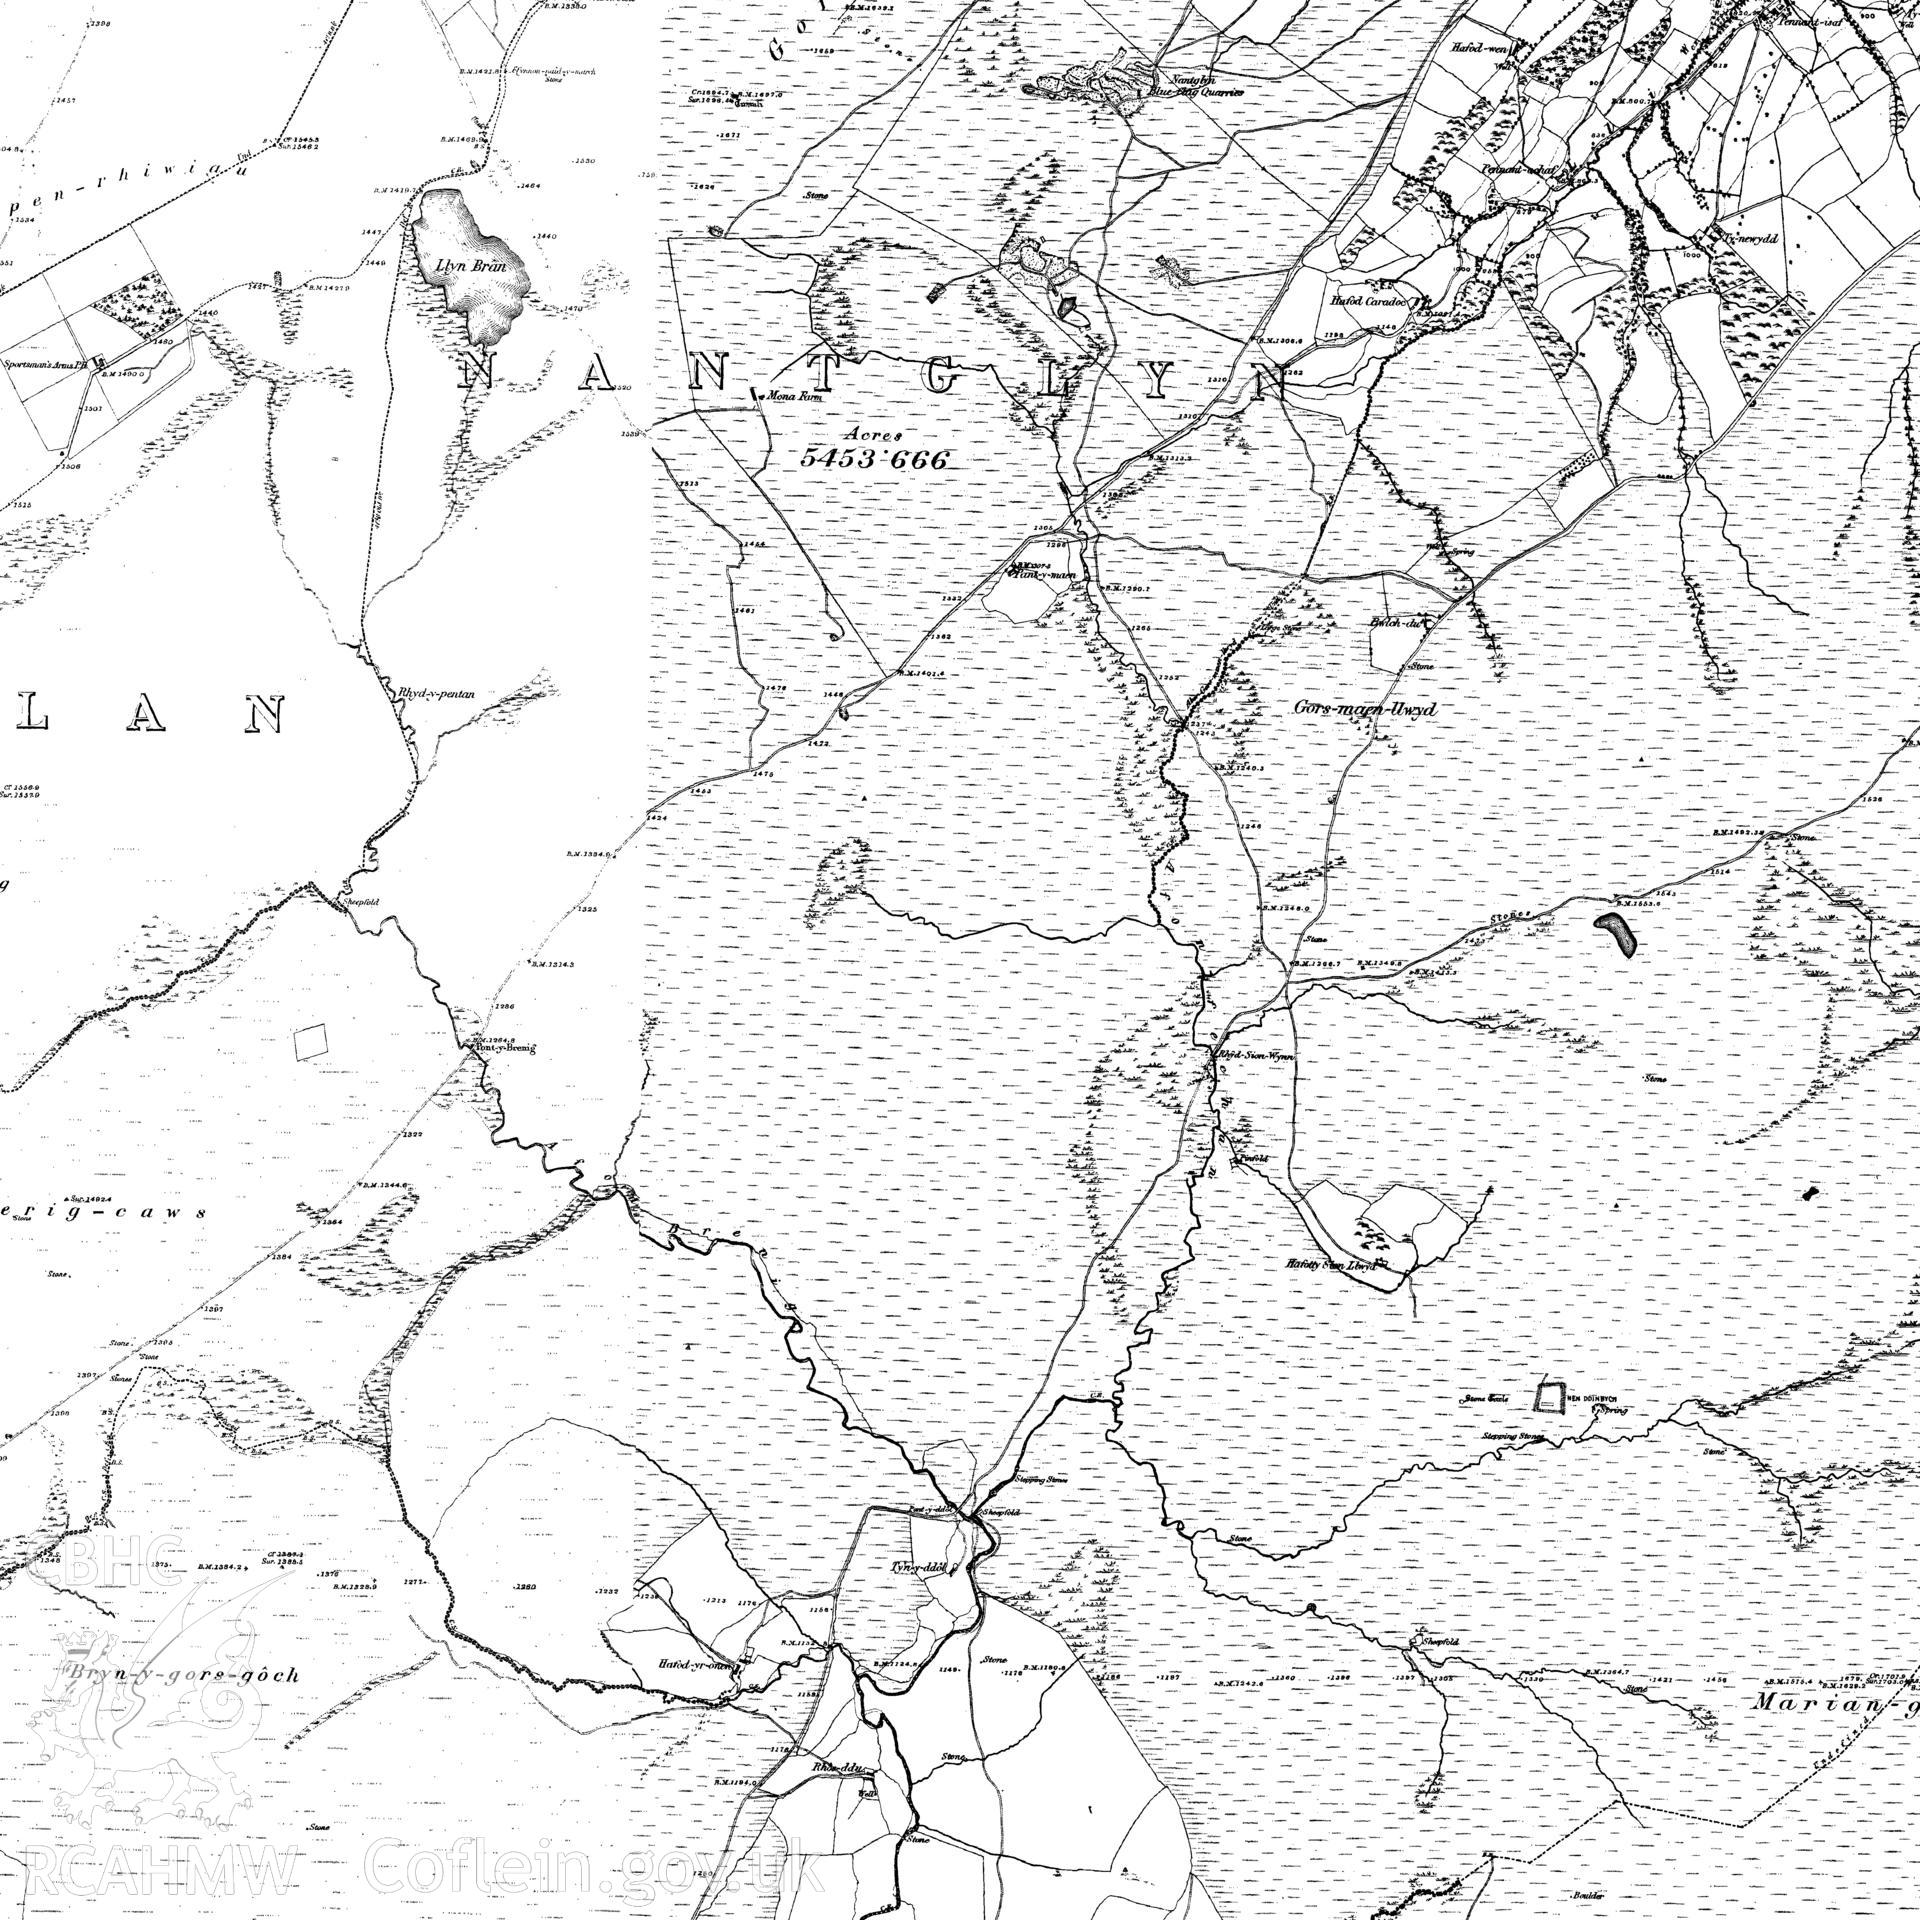 Digital copy of an Ordnance Survey map extract, showing the survey area. Map reference SH95NE.